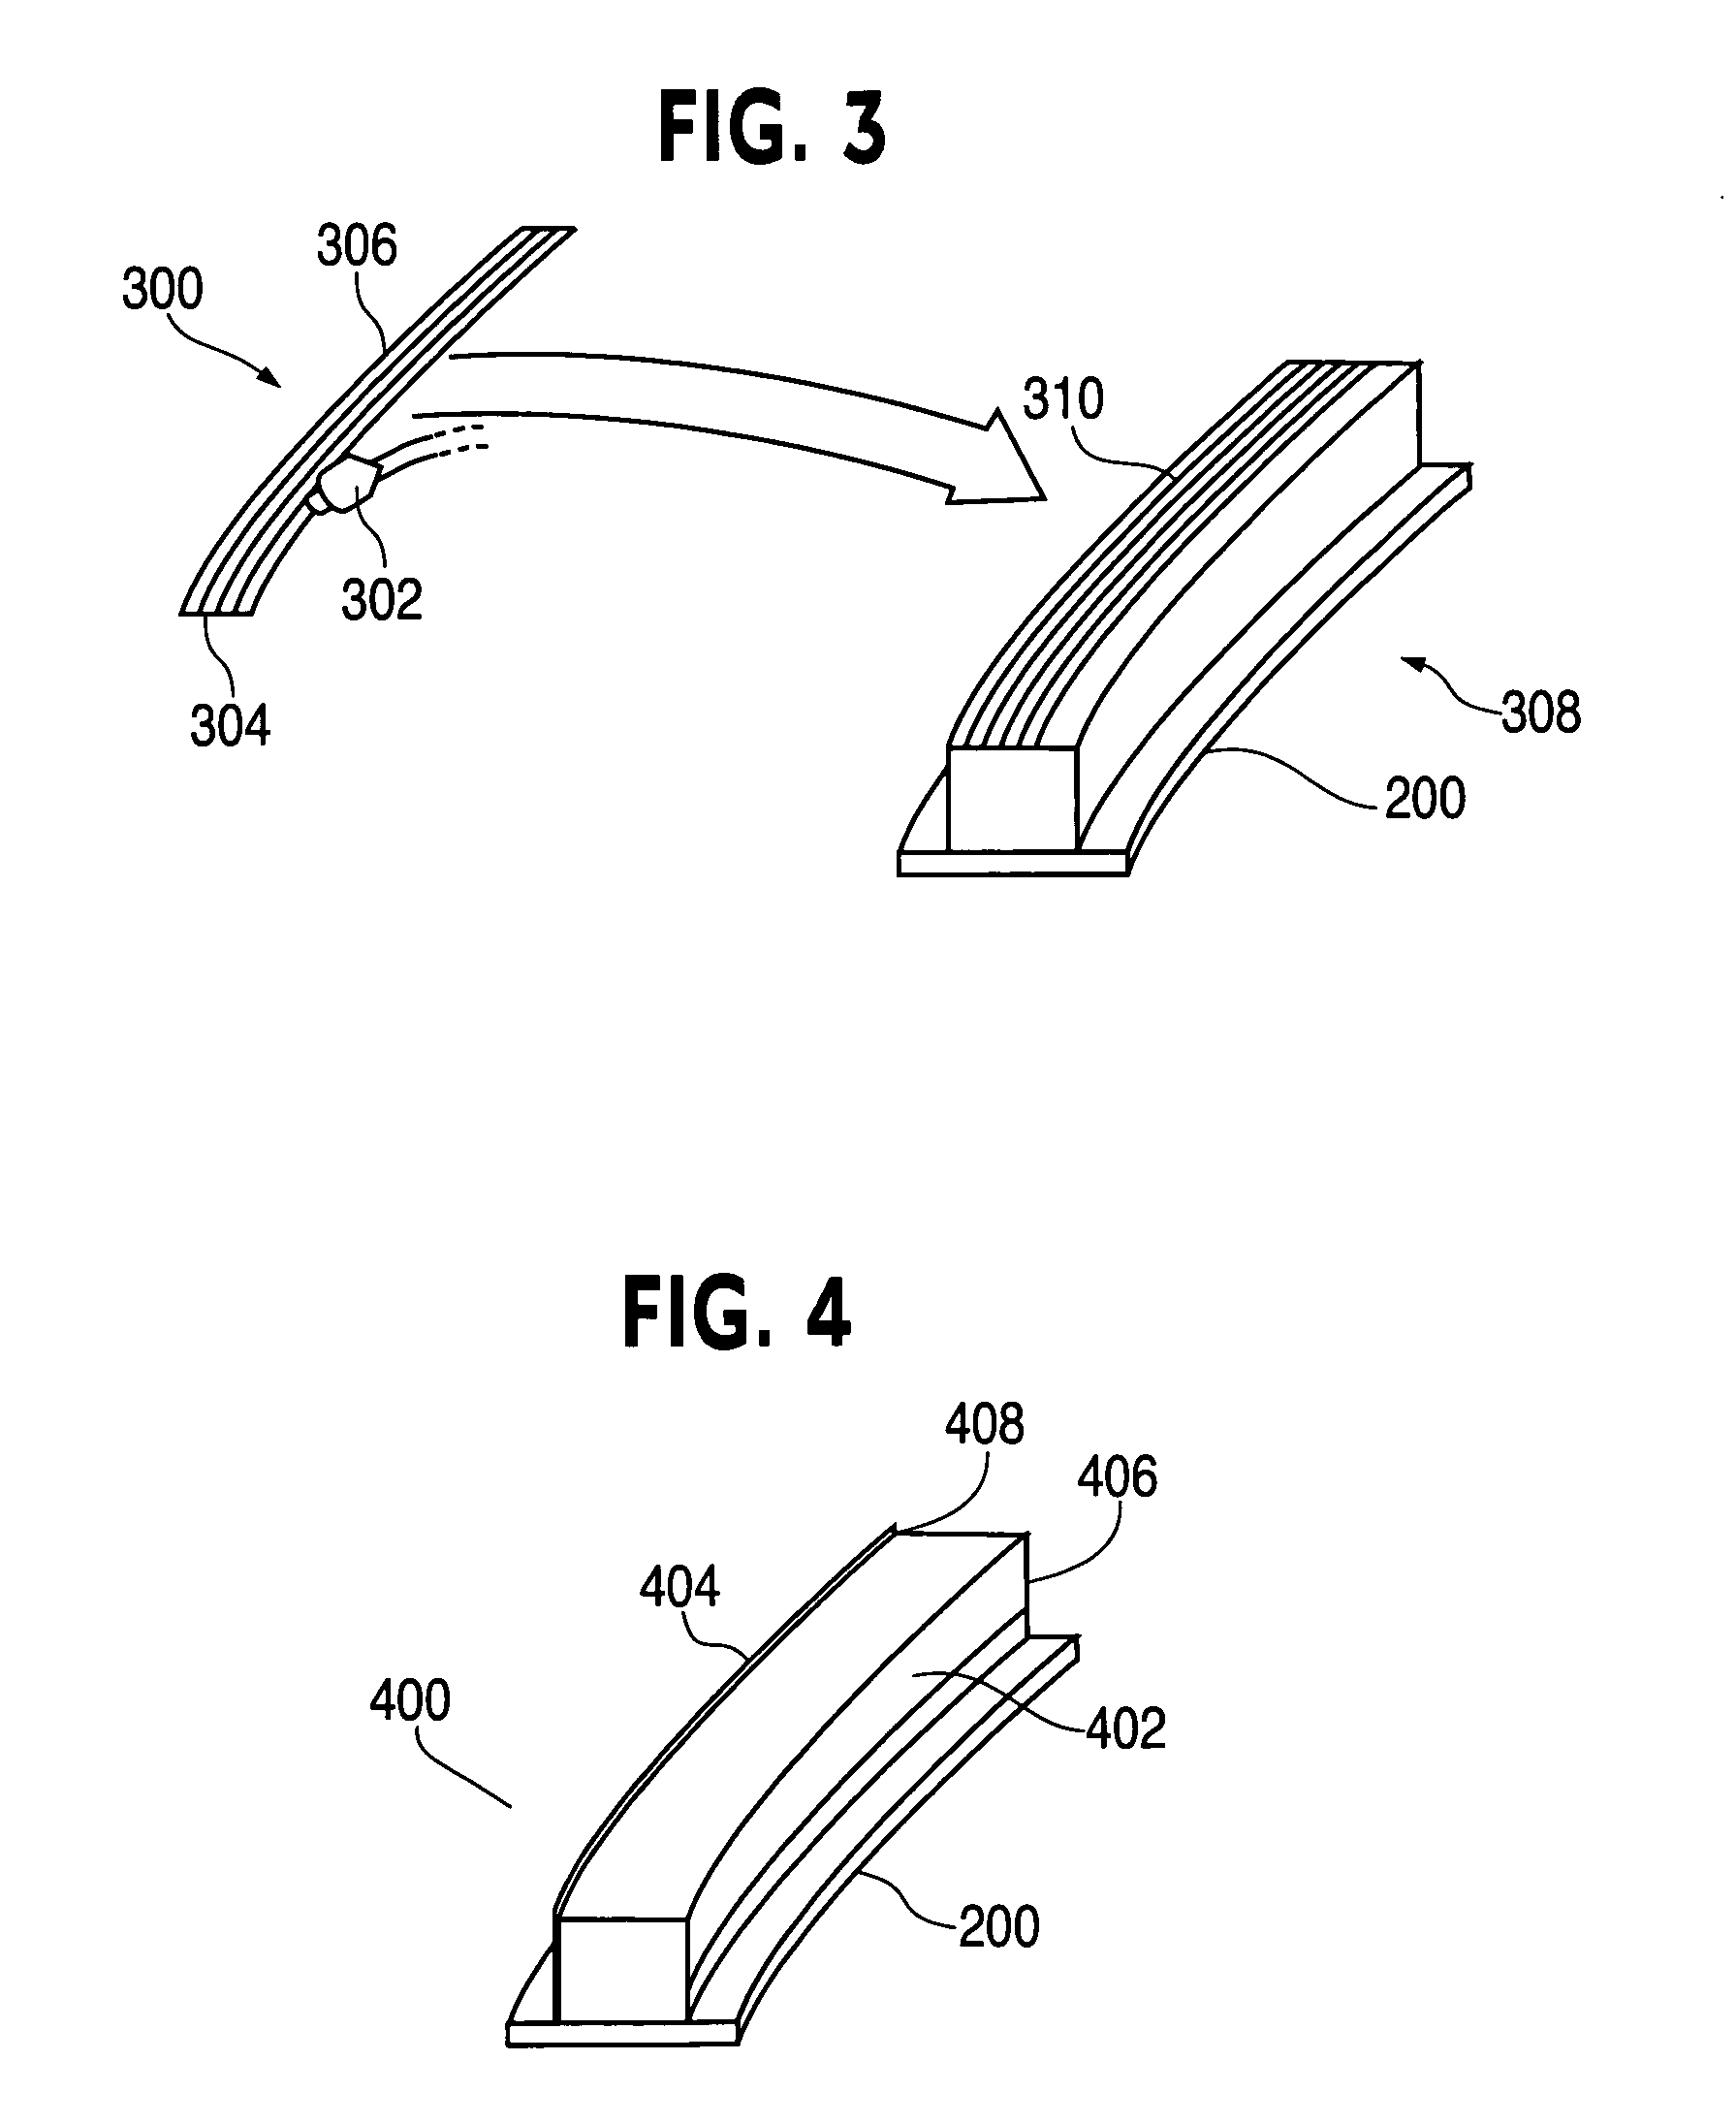 Method of manufacturing curved composite structural elements